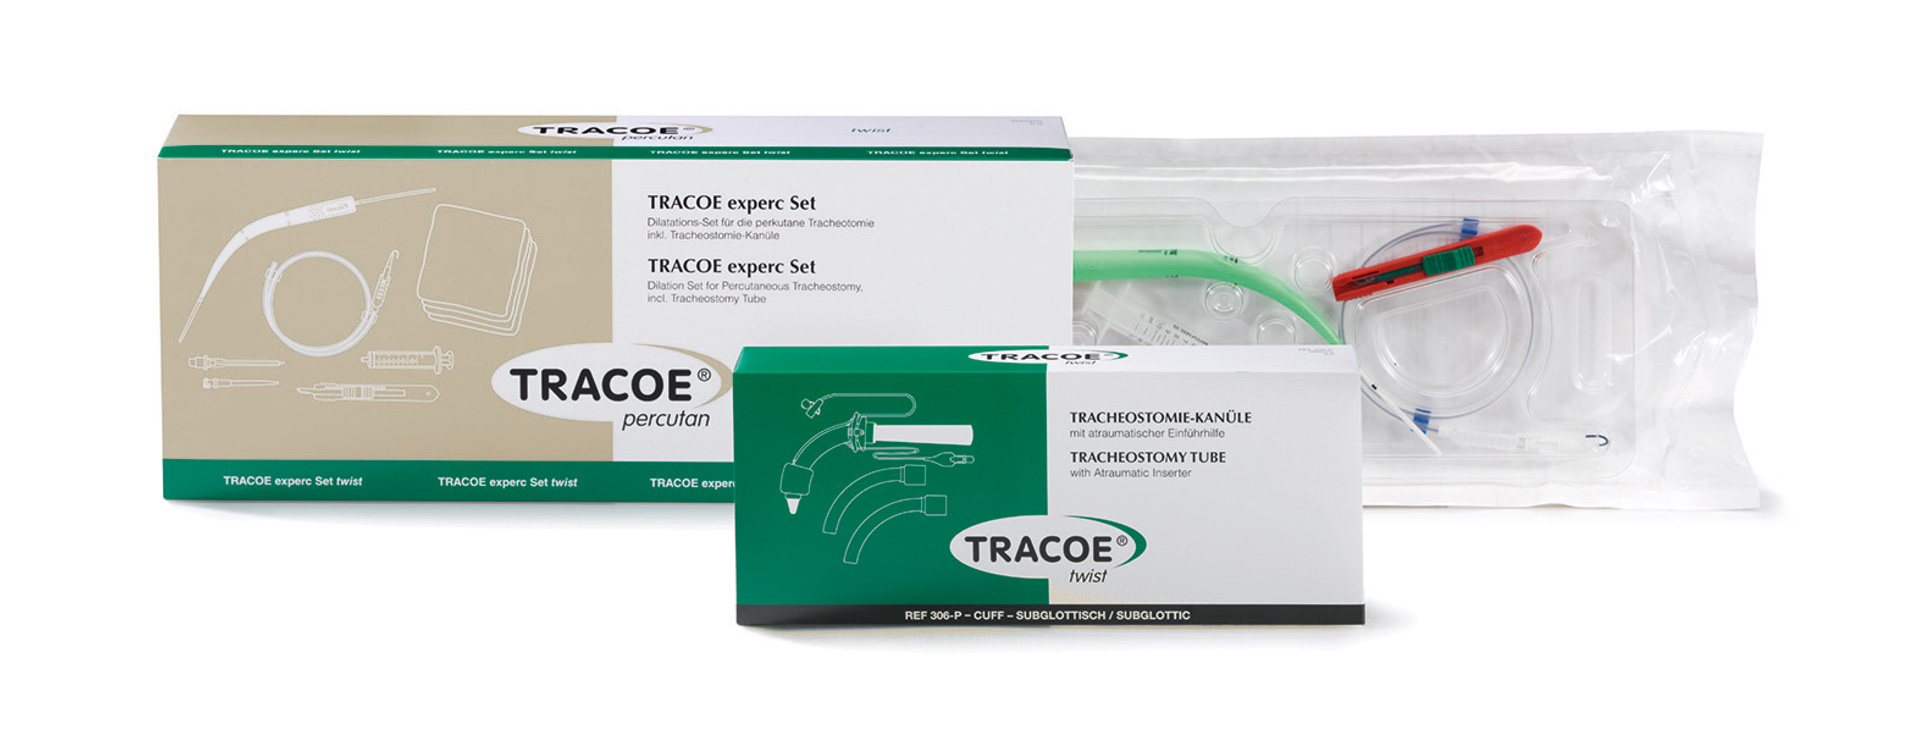 Packaging of Tracoe Experc + Twist Plus Tracheostomy Products placed on a white background. The package is open and shows the contents. The Tracoe Twist Plus tube package is placed in the foreground.